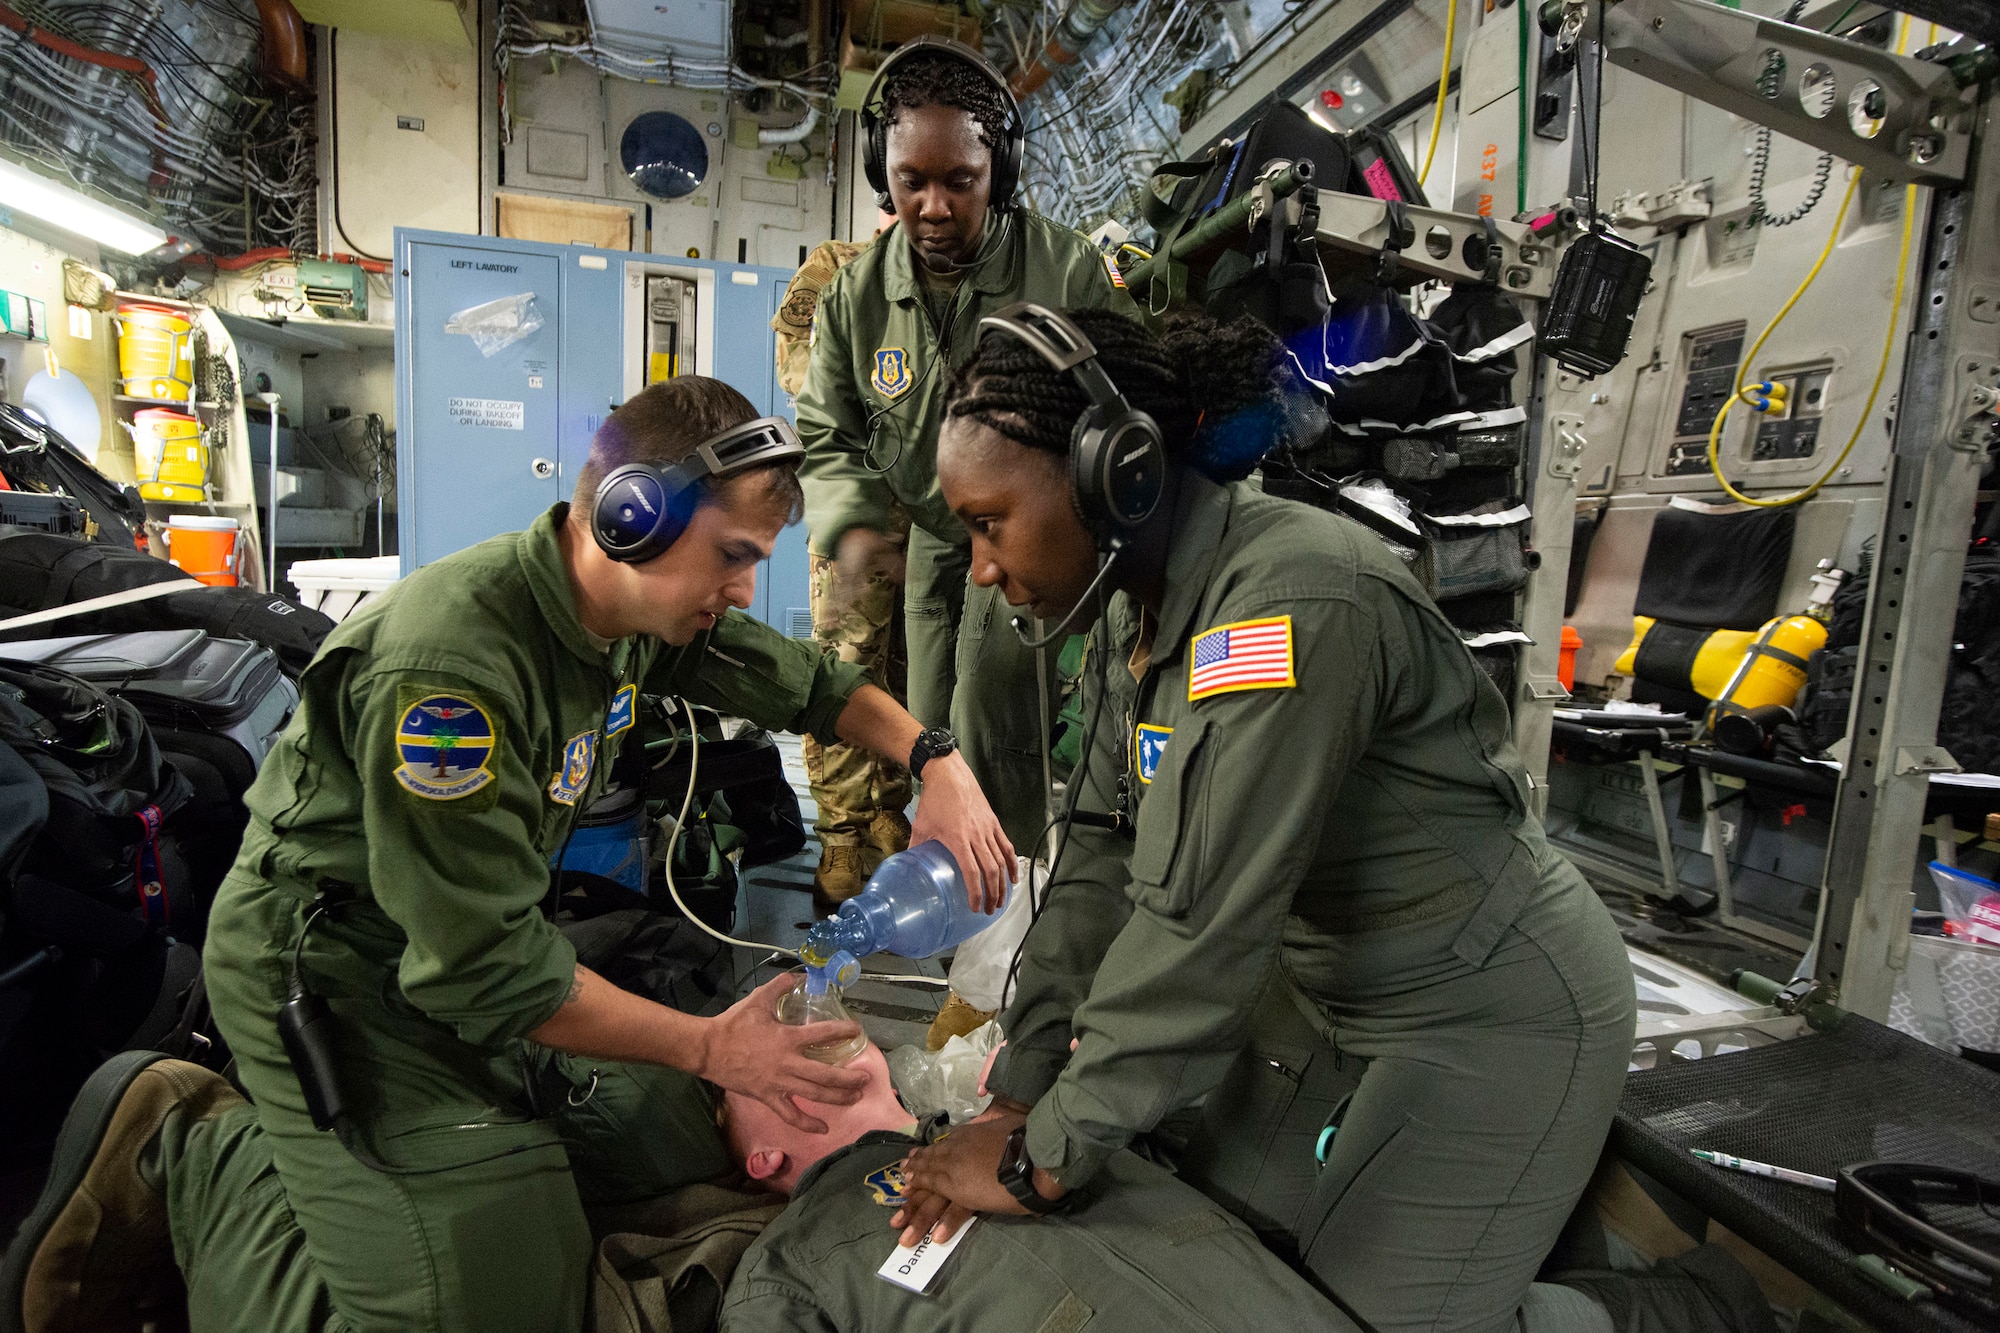 Humanitarian mission helps those in need while providing training for AE, aircrew